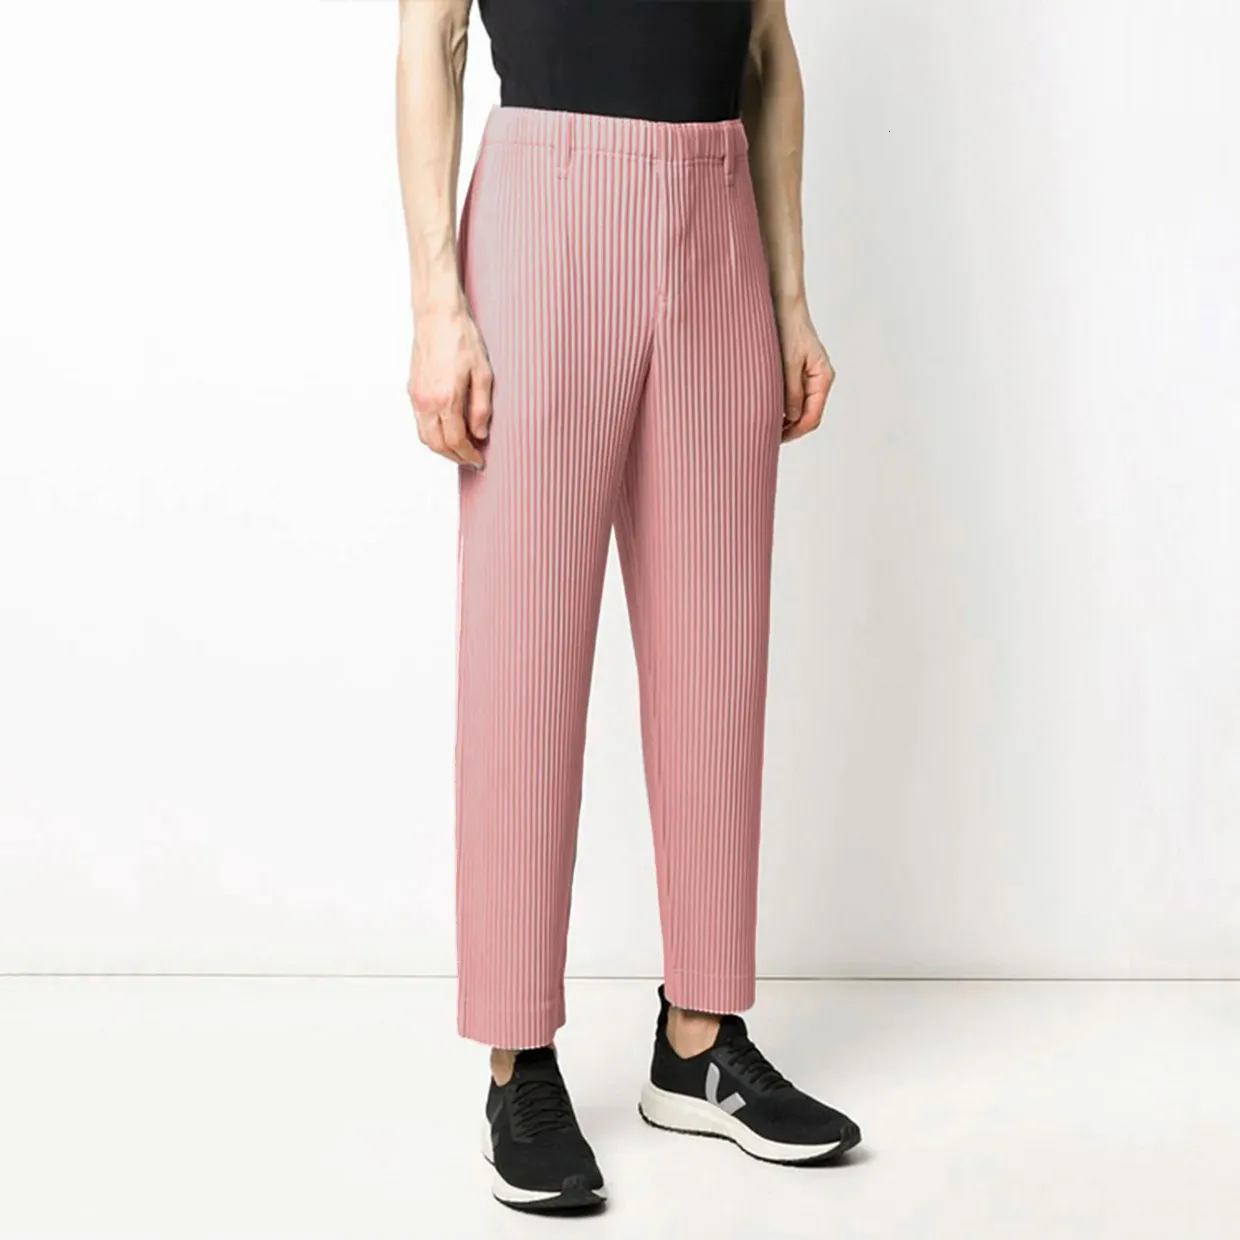 Men's Pants Miyake Pleated Pink Men's Classic Pants Suits Casual High Waisted Pencil Pants Designer Trousers Clothes 230327